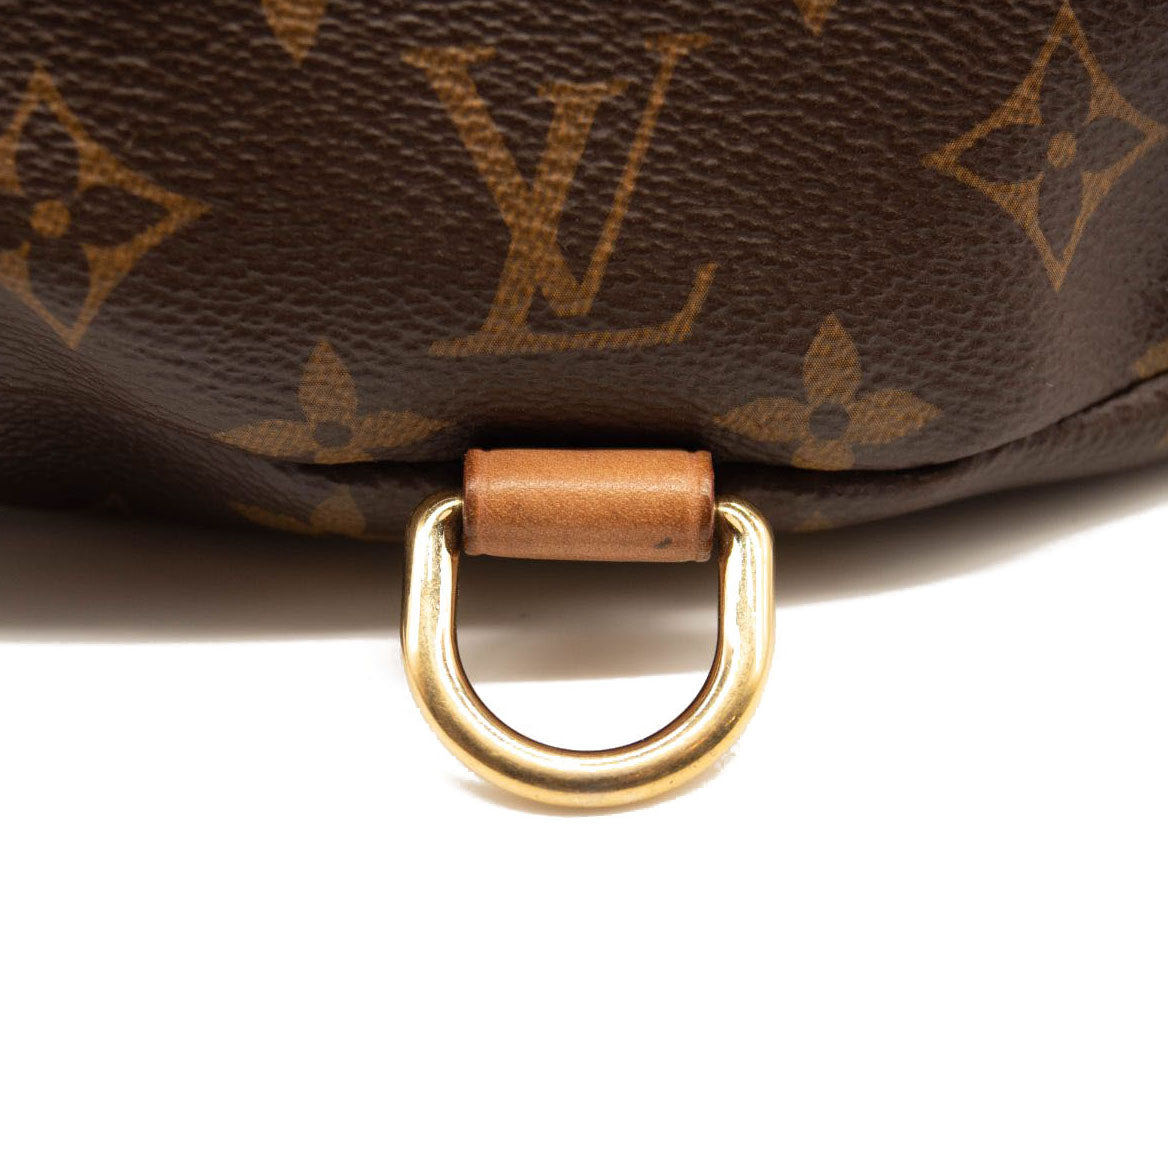 used louis vuitton suitcase